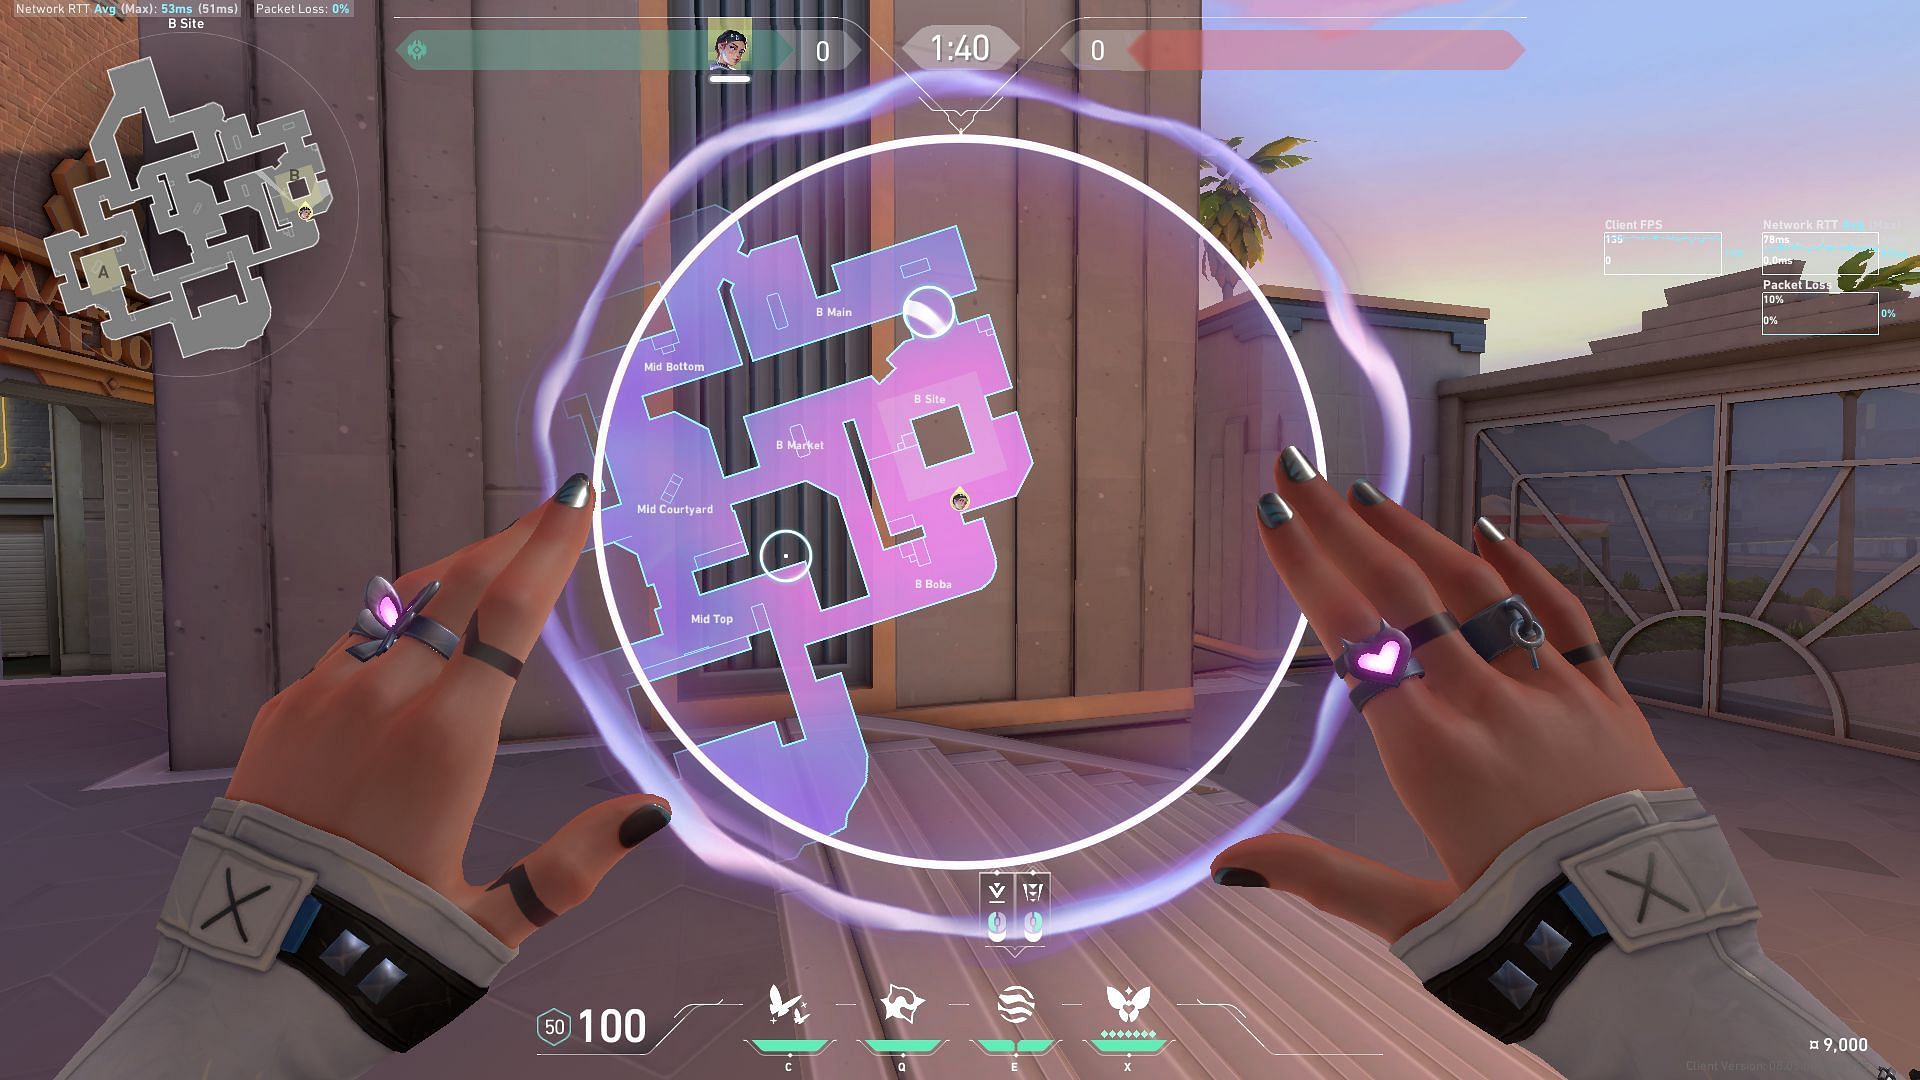 B-Site defending smokes on Valorant&#039;s Sunset tactical map view (Image via Riot Games)